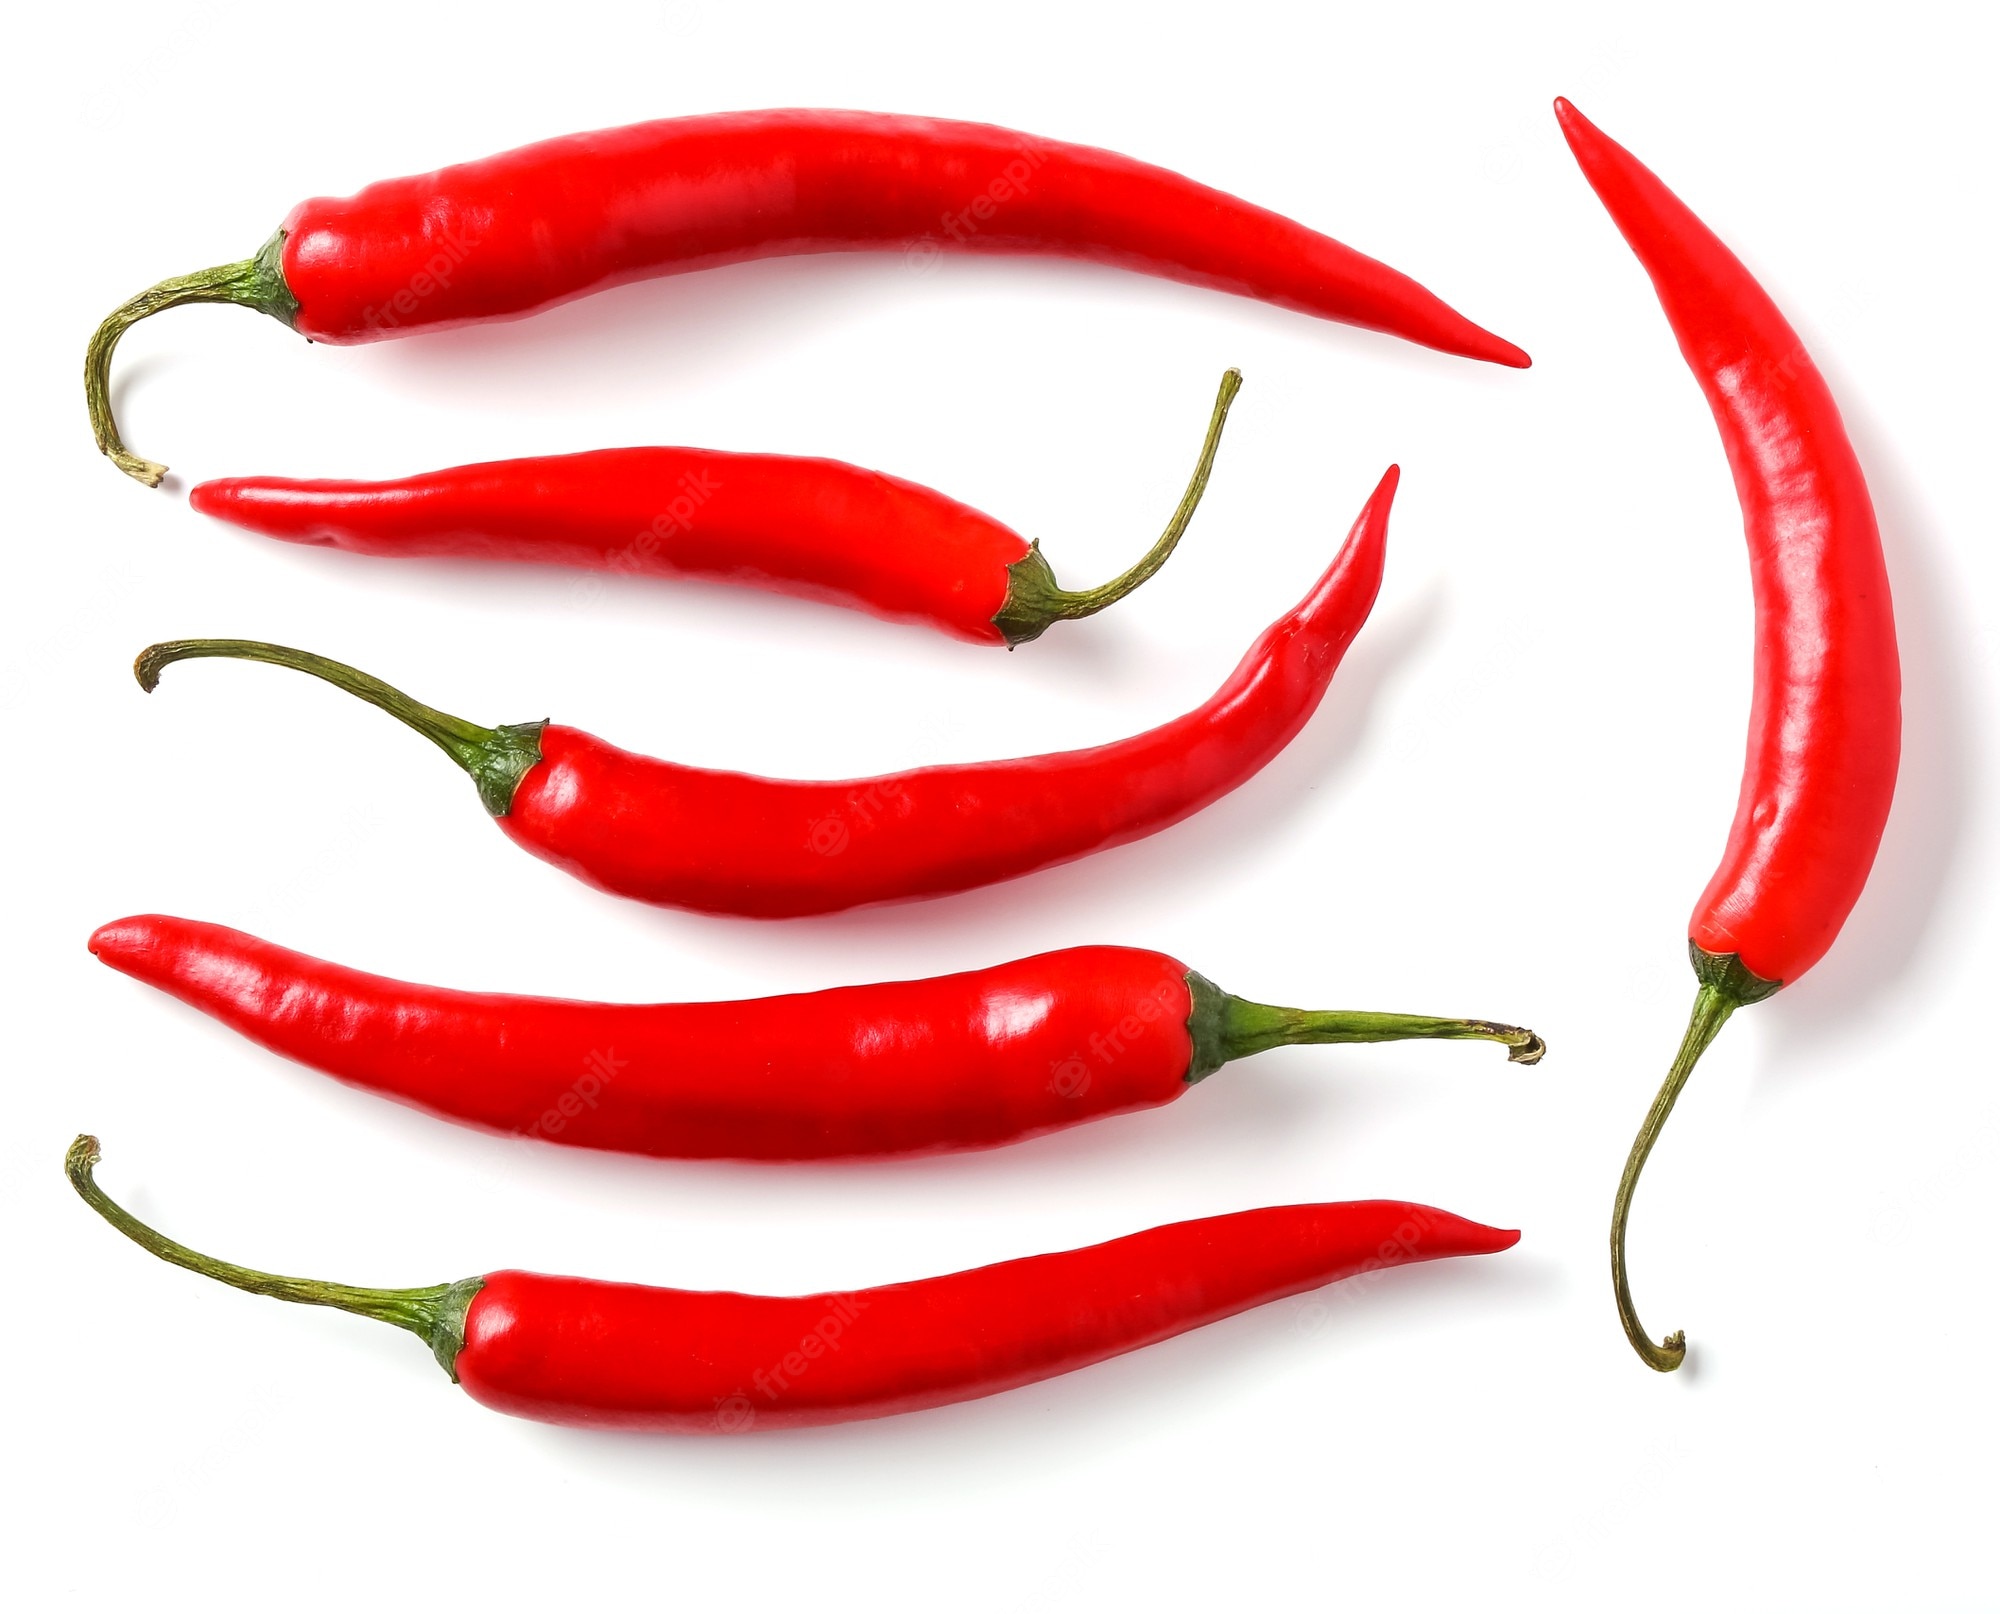 Will Eating More Chilis Help You Live Longer? Harvard, 44% OFF